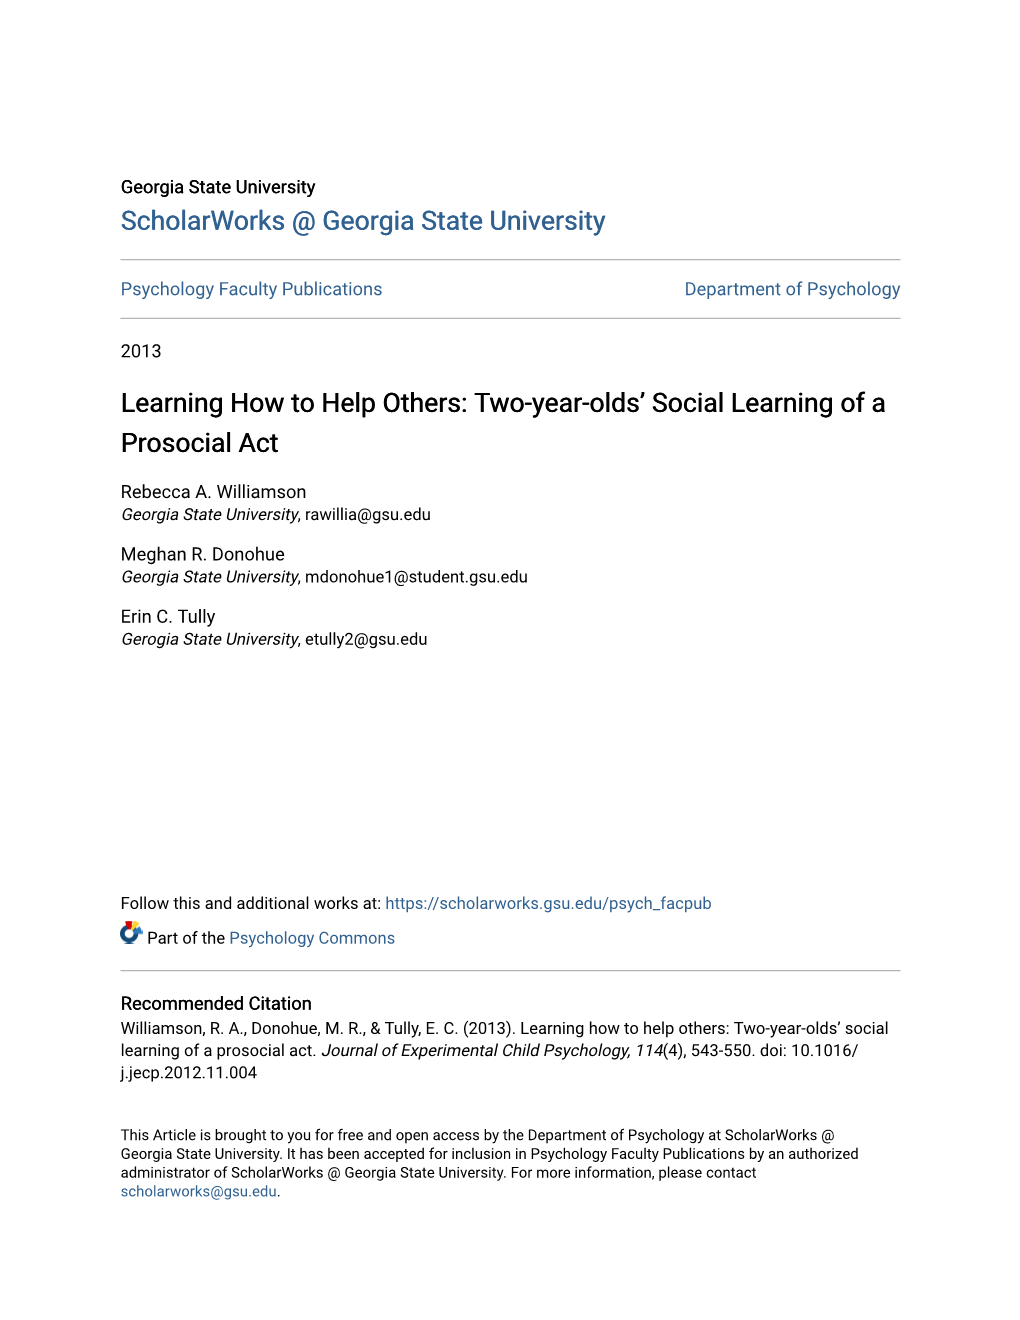 Two-Year-Olds' Social Learning of a Prosocial